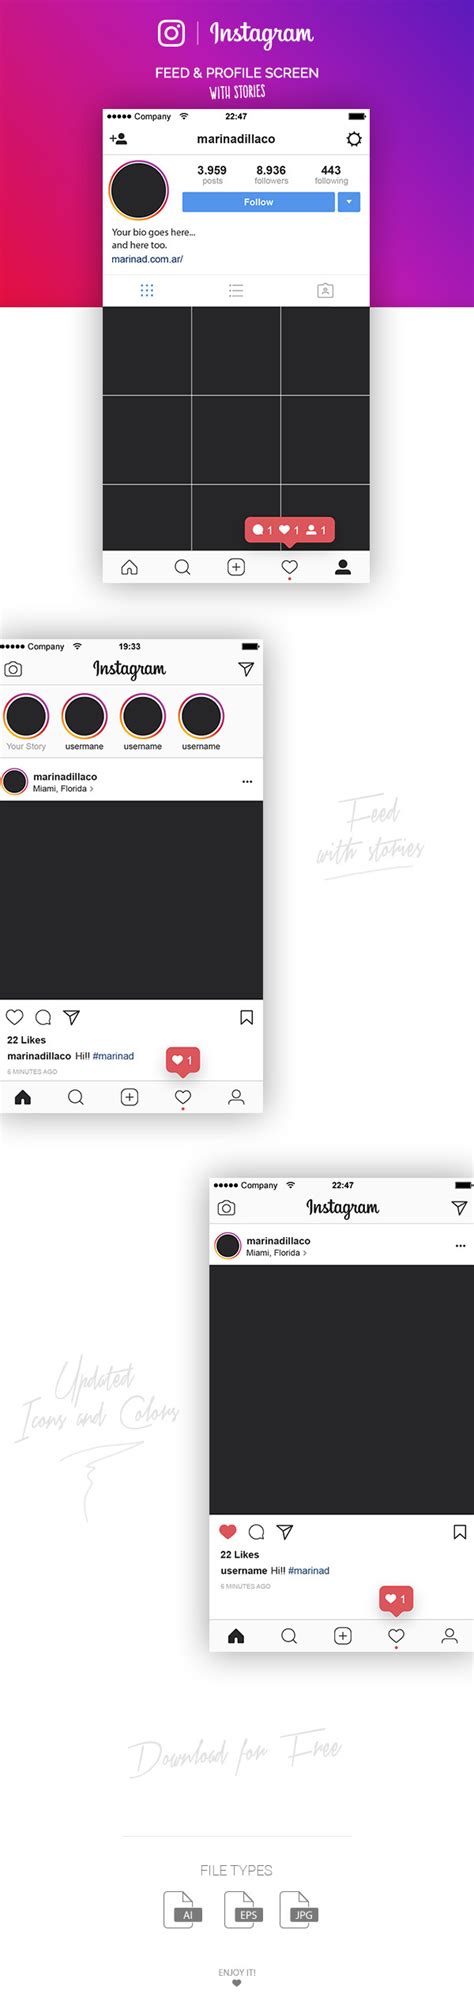 Instagram Feed And Profile Screens Ui 2017 Free Psd